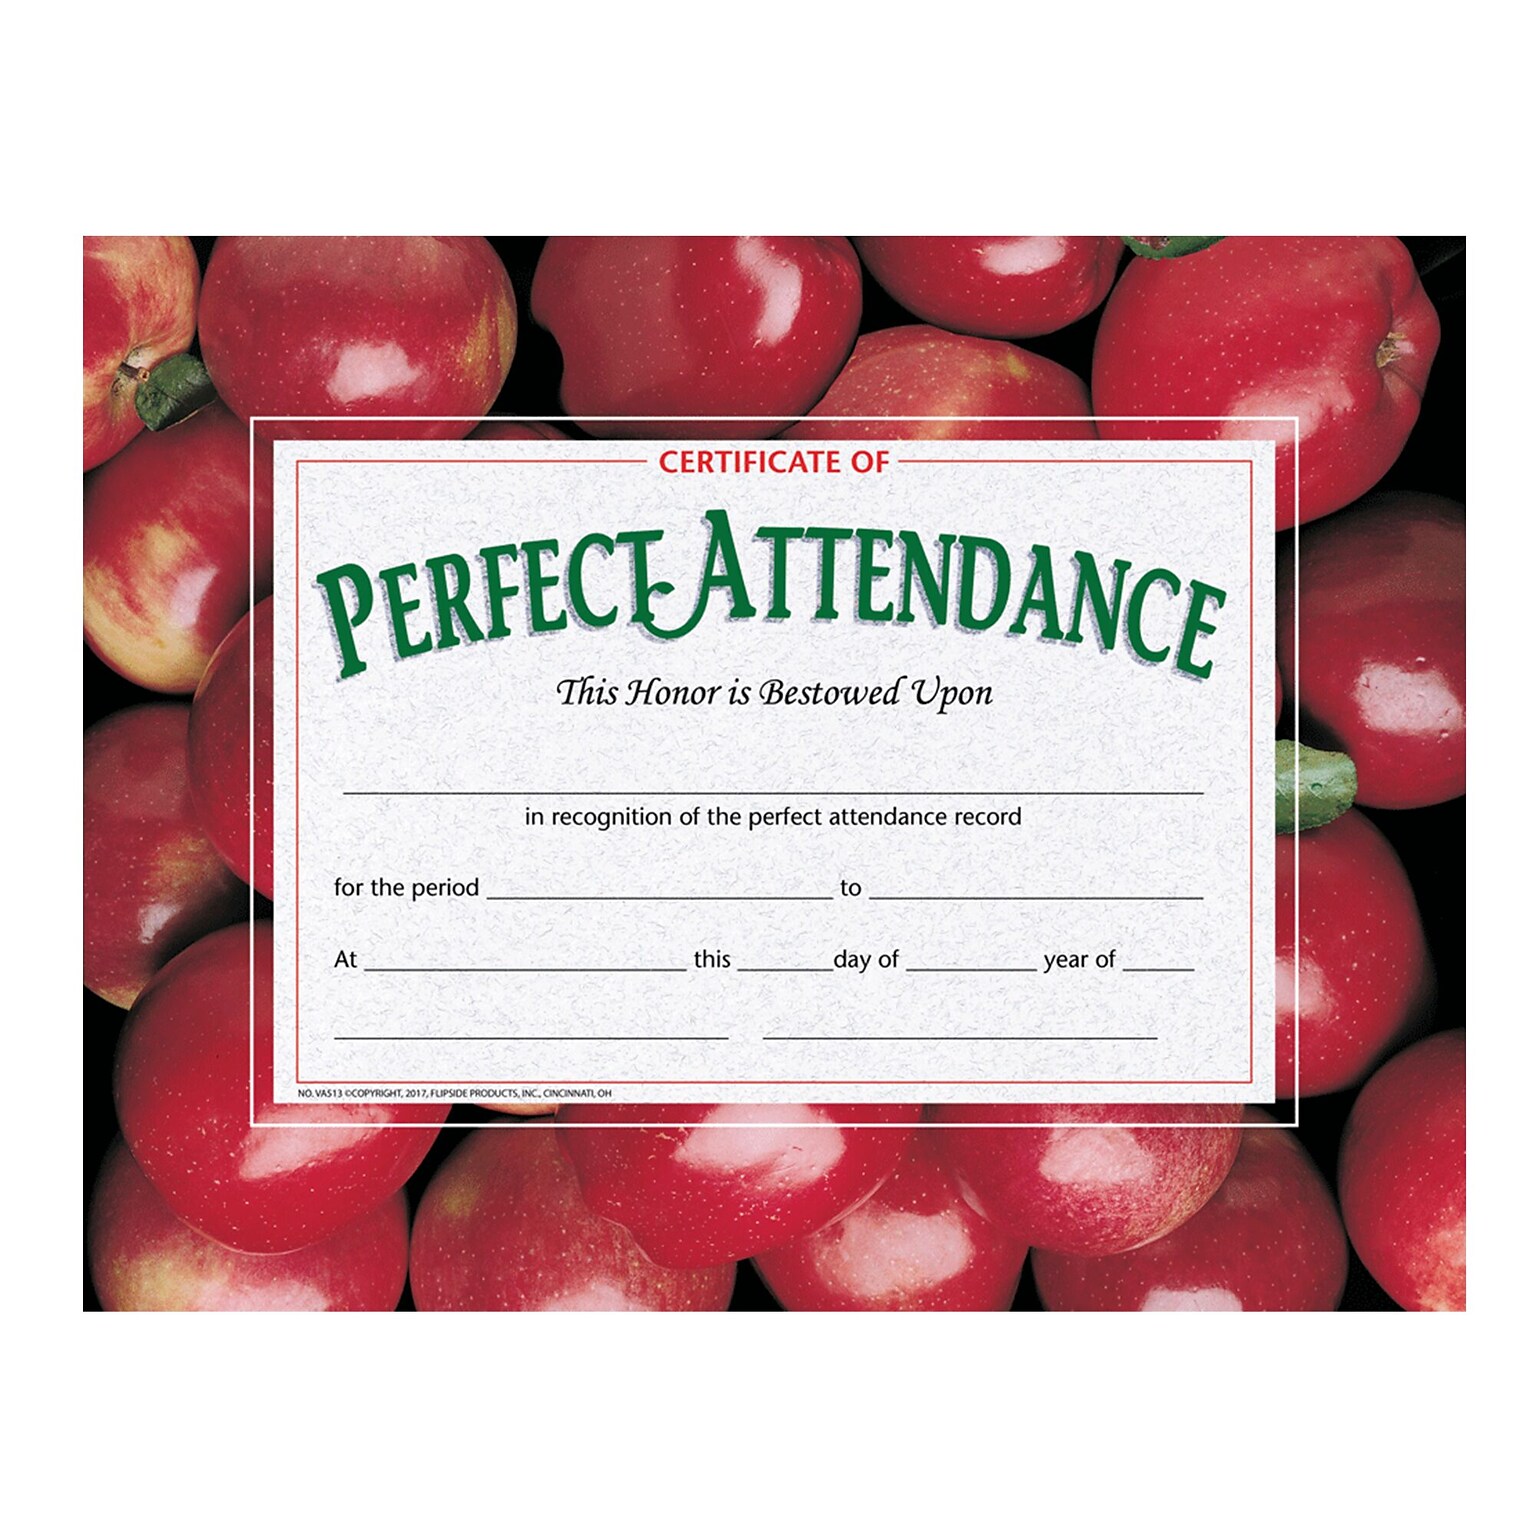 Hayes Certificate of Perfect Attendance, 8.5 x 11, 30 Certificates/Pack, 5 Packs (H-VA513)